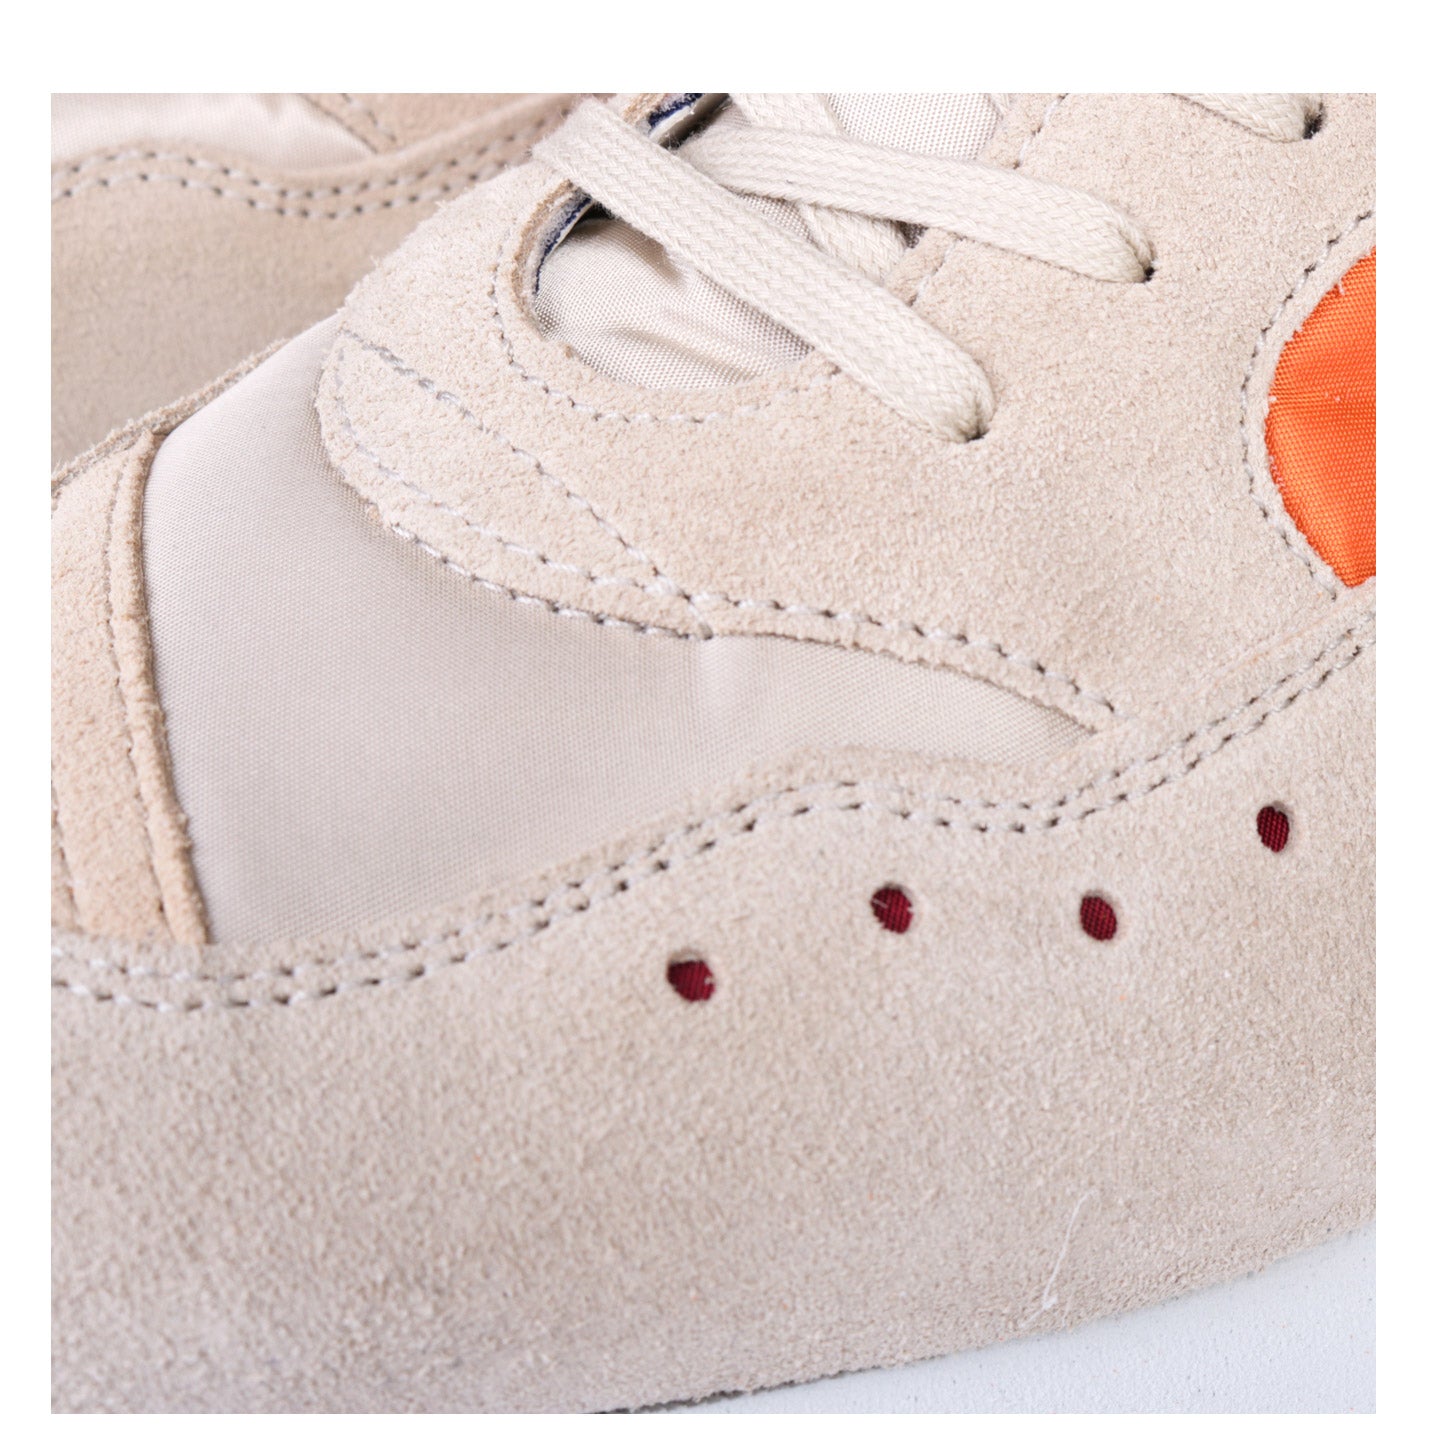 REPRODUCTION OF FOUND FRENCH MILITARY TRAINER ORANGE / BEIGE